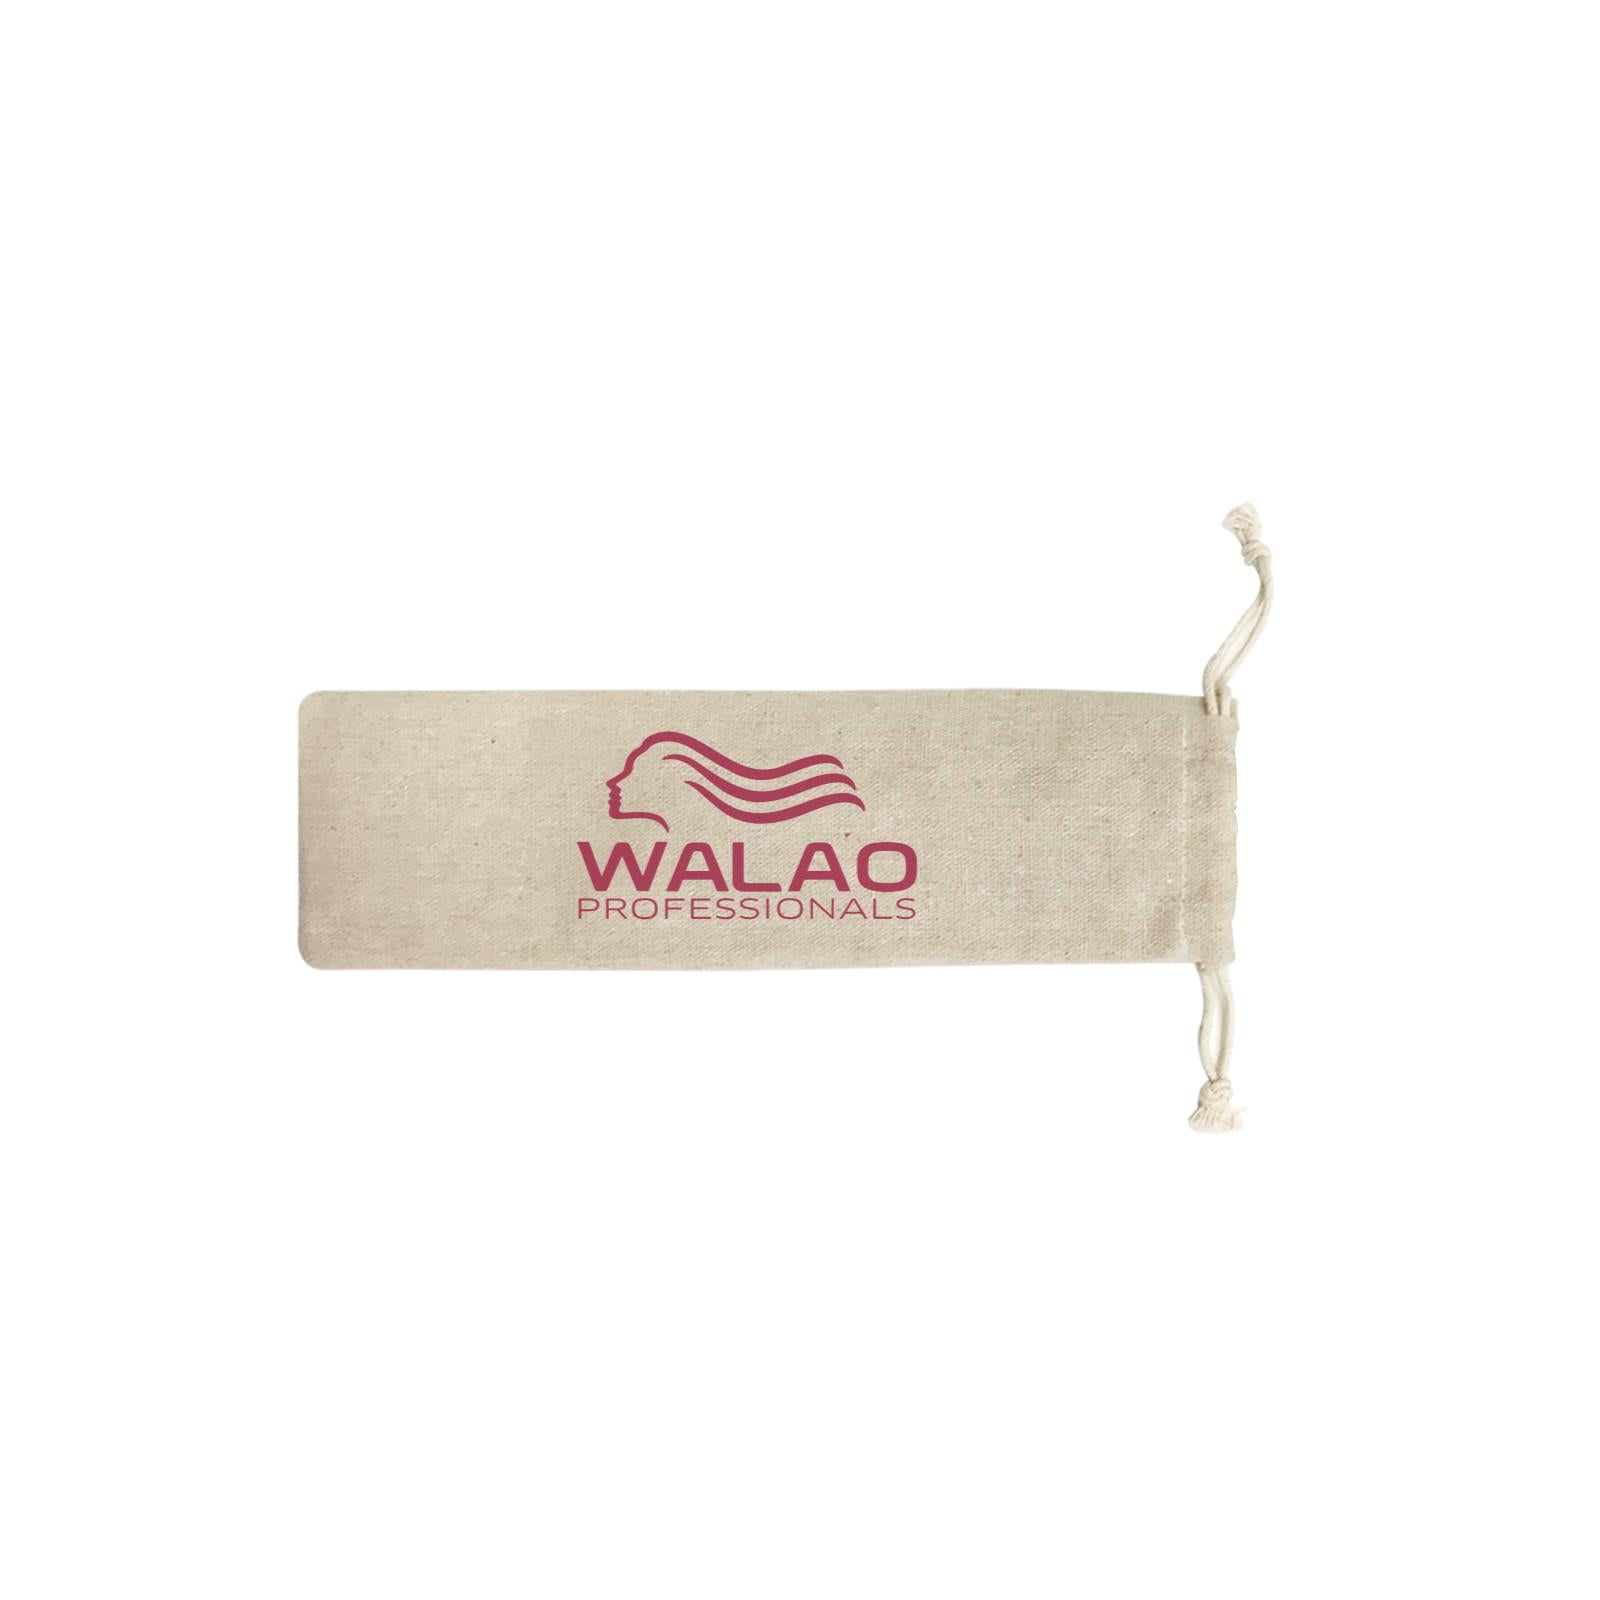 Slang Statement Walao Professional SB Straw Pouch (No Straws included)